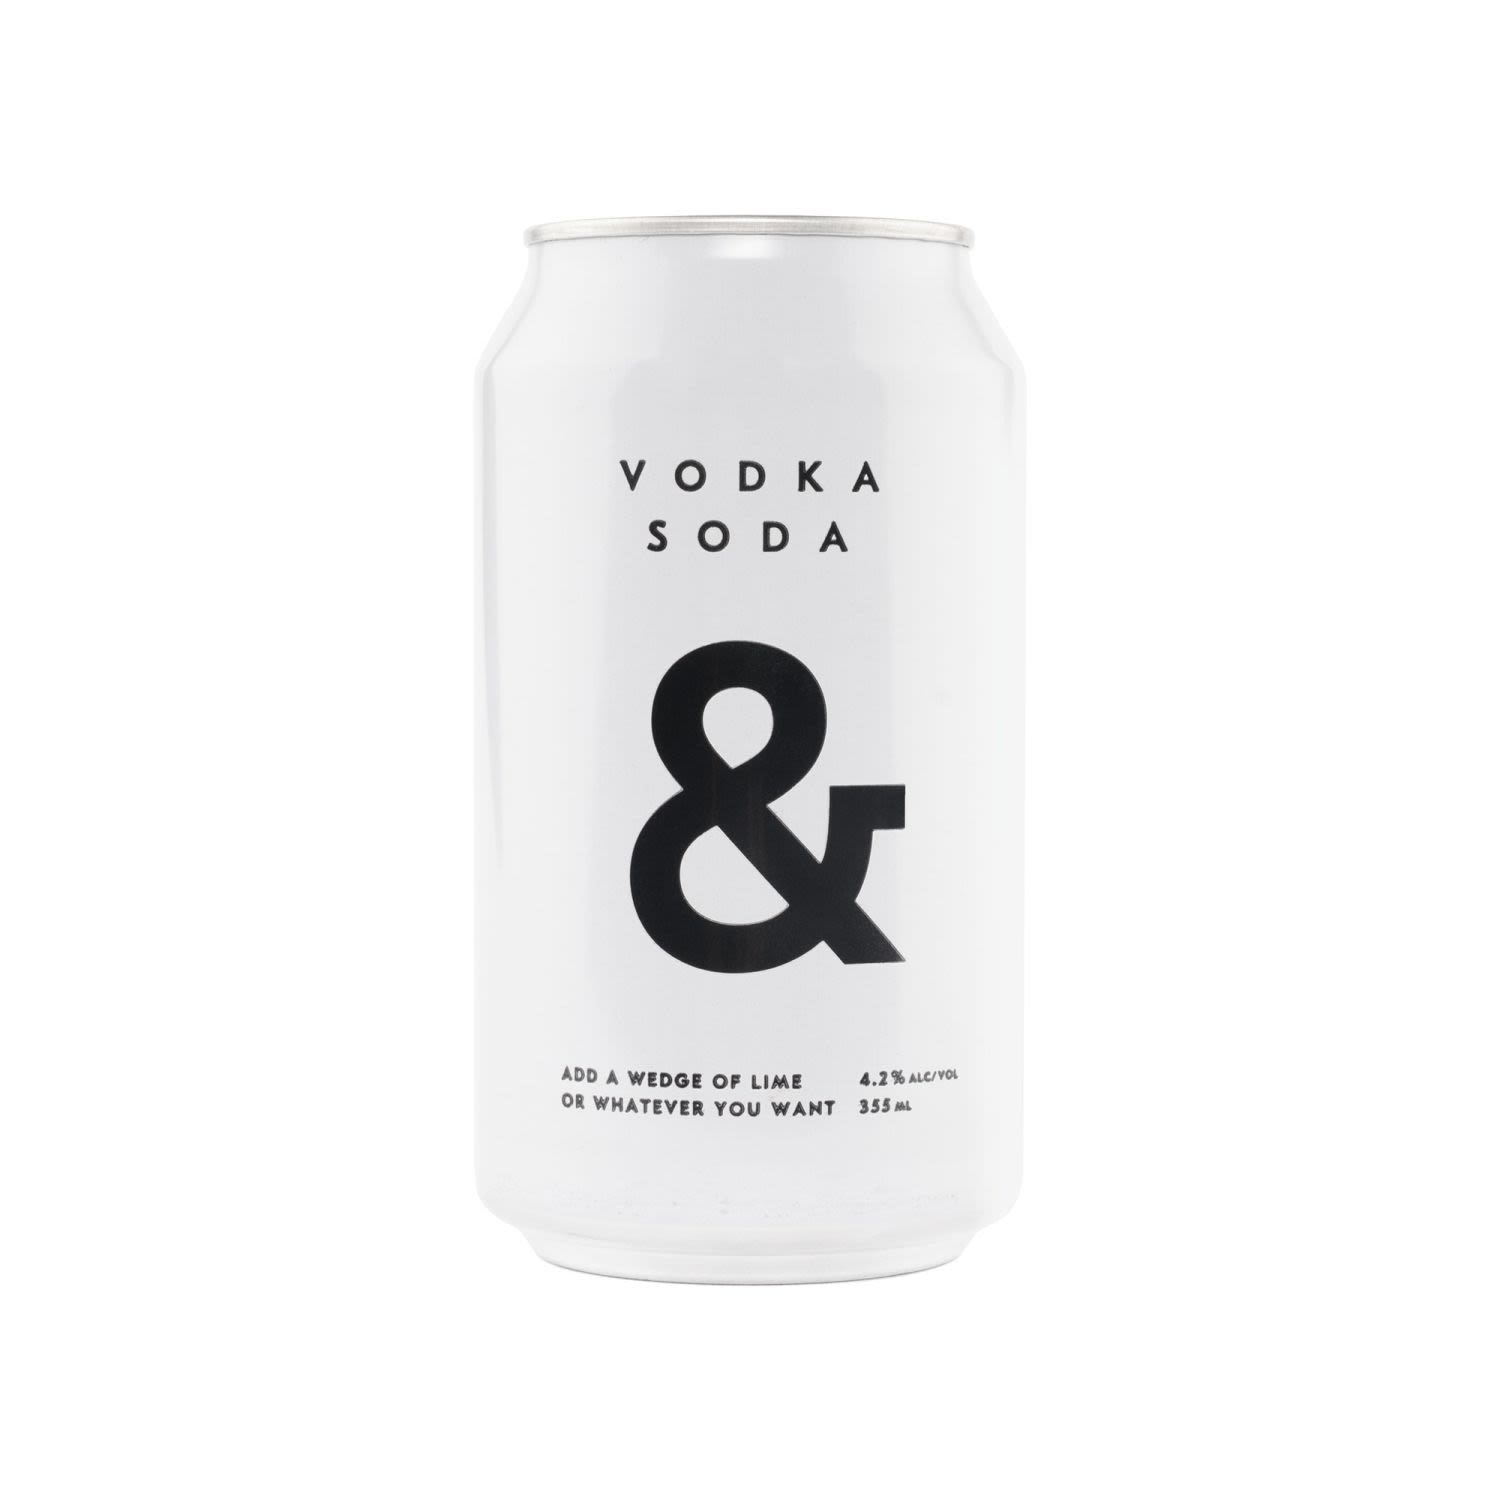 Vodka. Soda. That's it. Add whatever you want. This low cal Vodka & Soda from Ampersand Projects is the perfect premix on a sunny day.<br /> <br />Alcohol Volume: 4.20%<br /><br />Pack Format: Can<br /><br />Standard Drinks: 1.2</br /><br />Pack Type: Can<br /><br />Country of Origin: Australia<br />